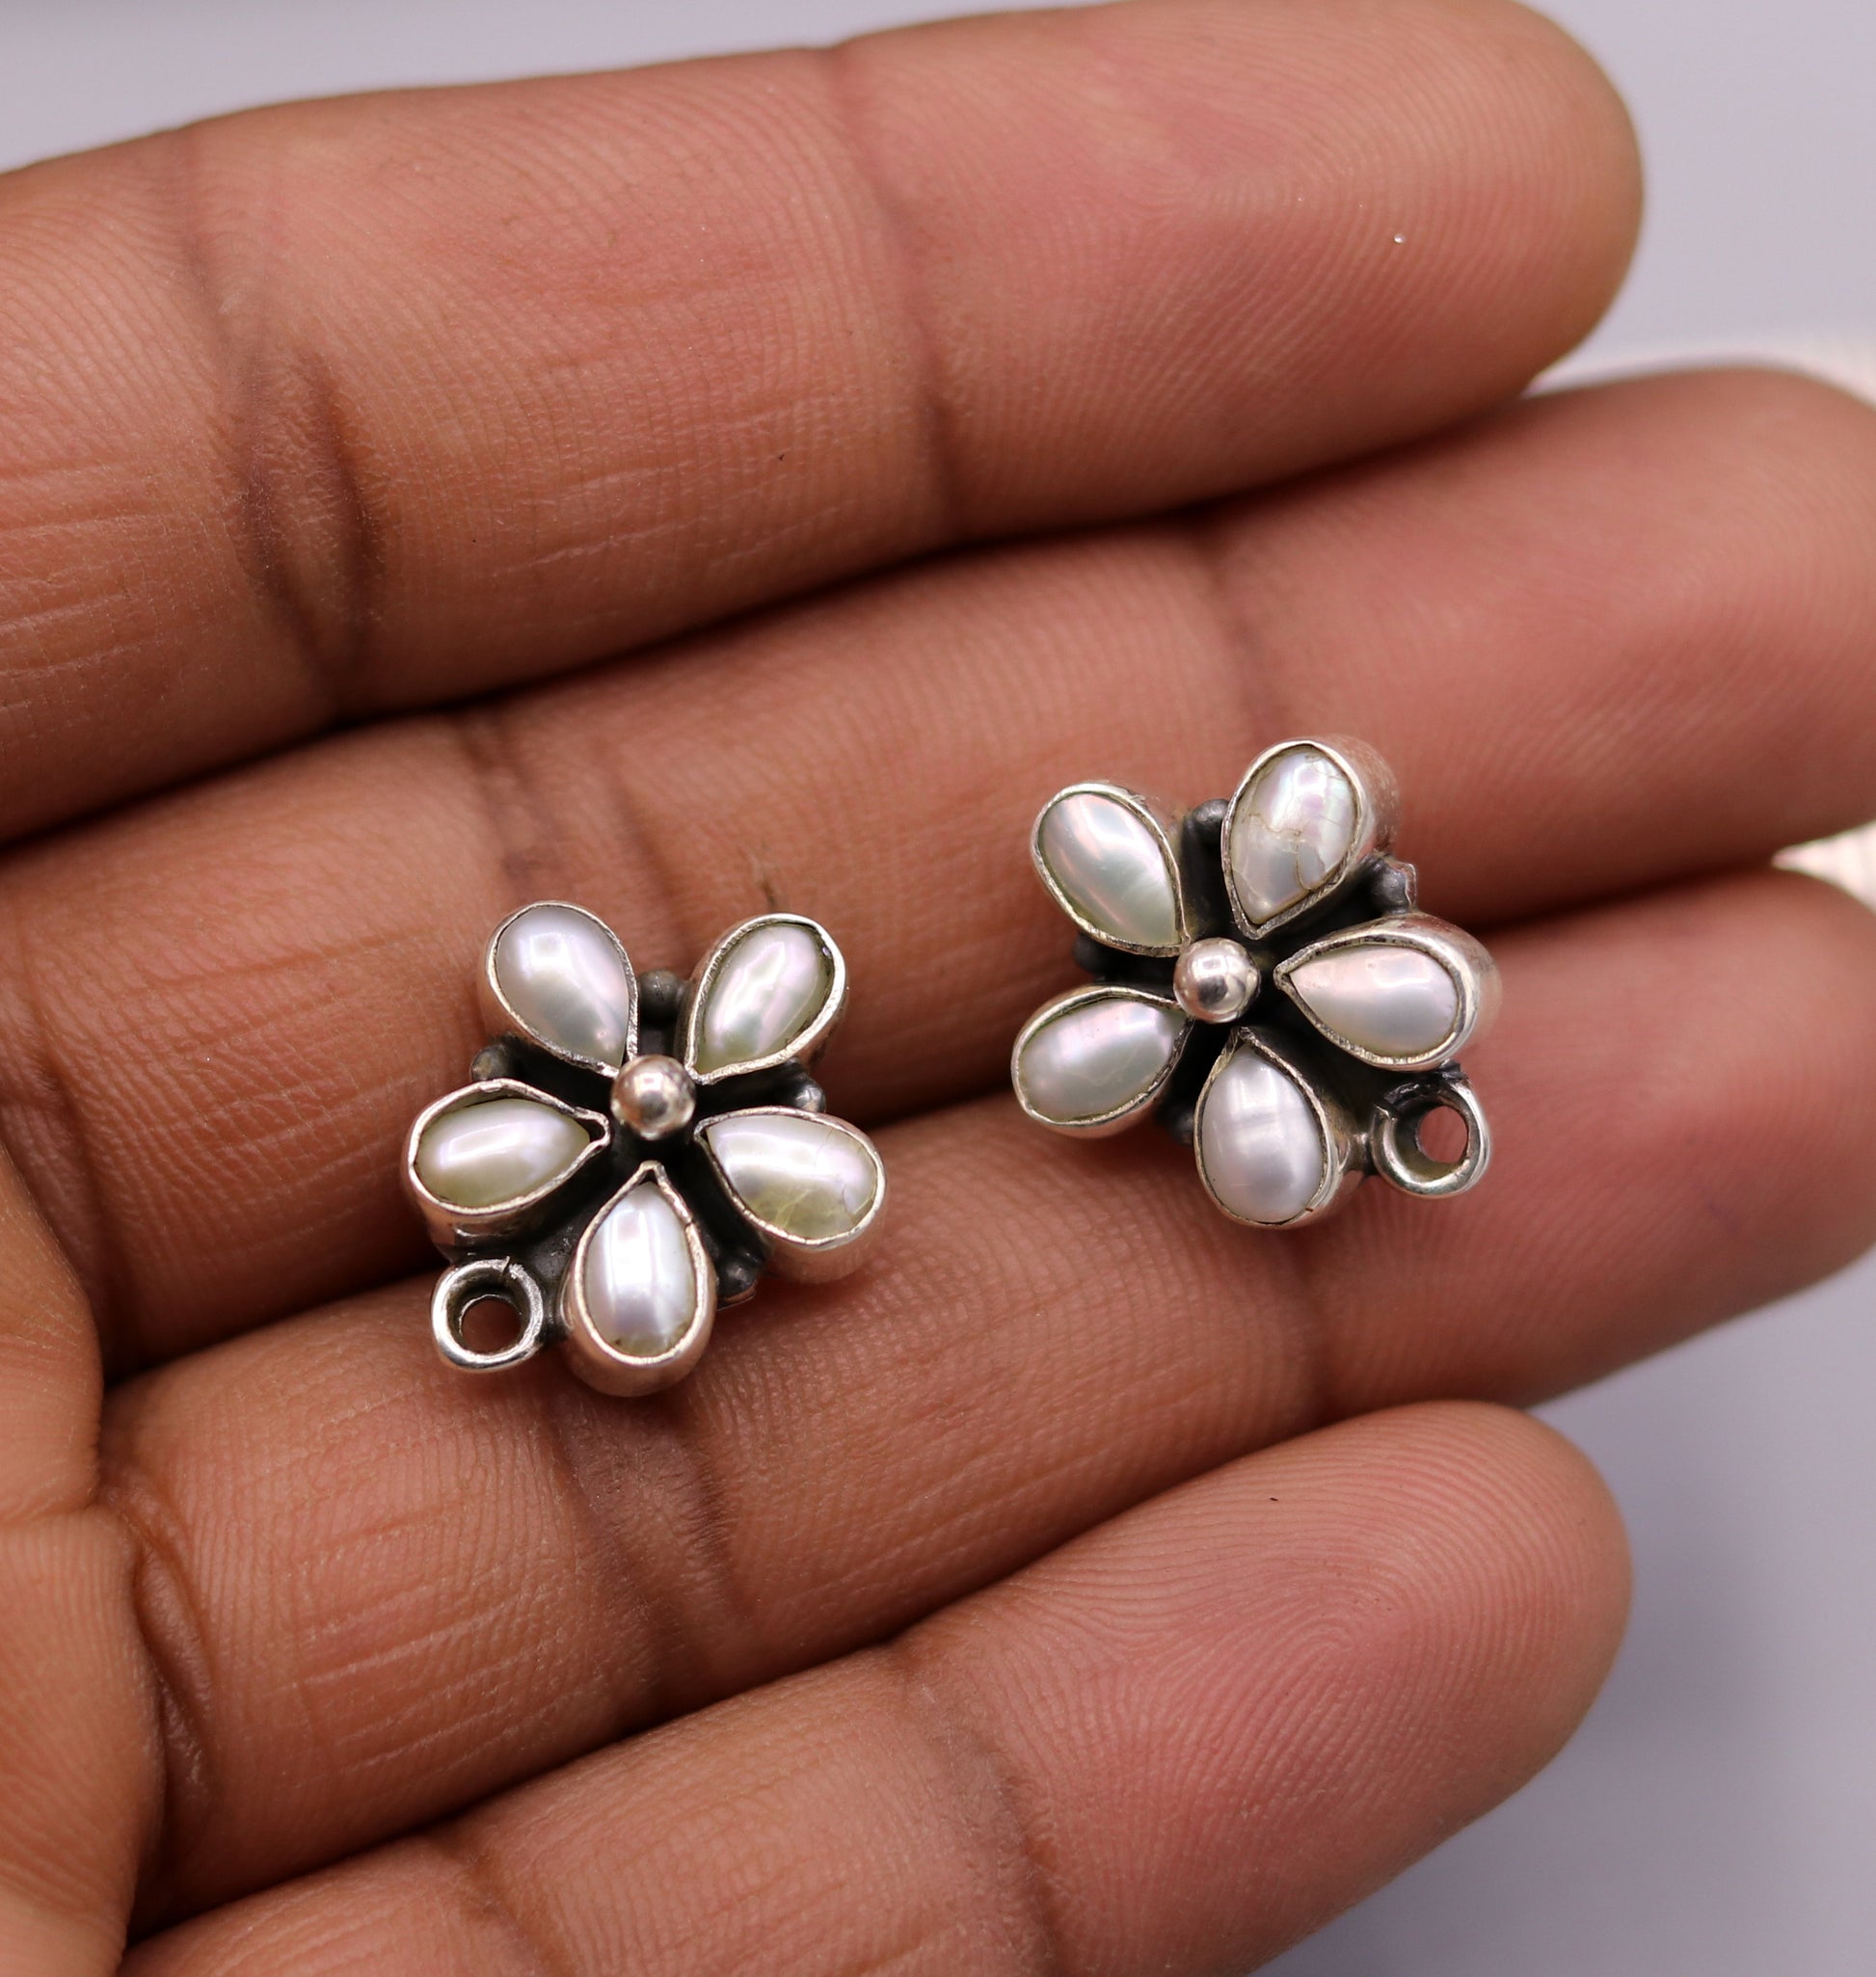 925 Sterling silver handmade stud earrings, awesome white pearl customized stud ear plug, pearl earring bridesmaid gifting jewelry s104 - TRIBAL ORNAMENTS